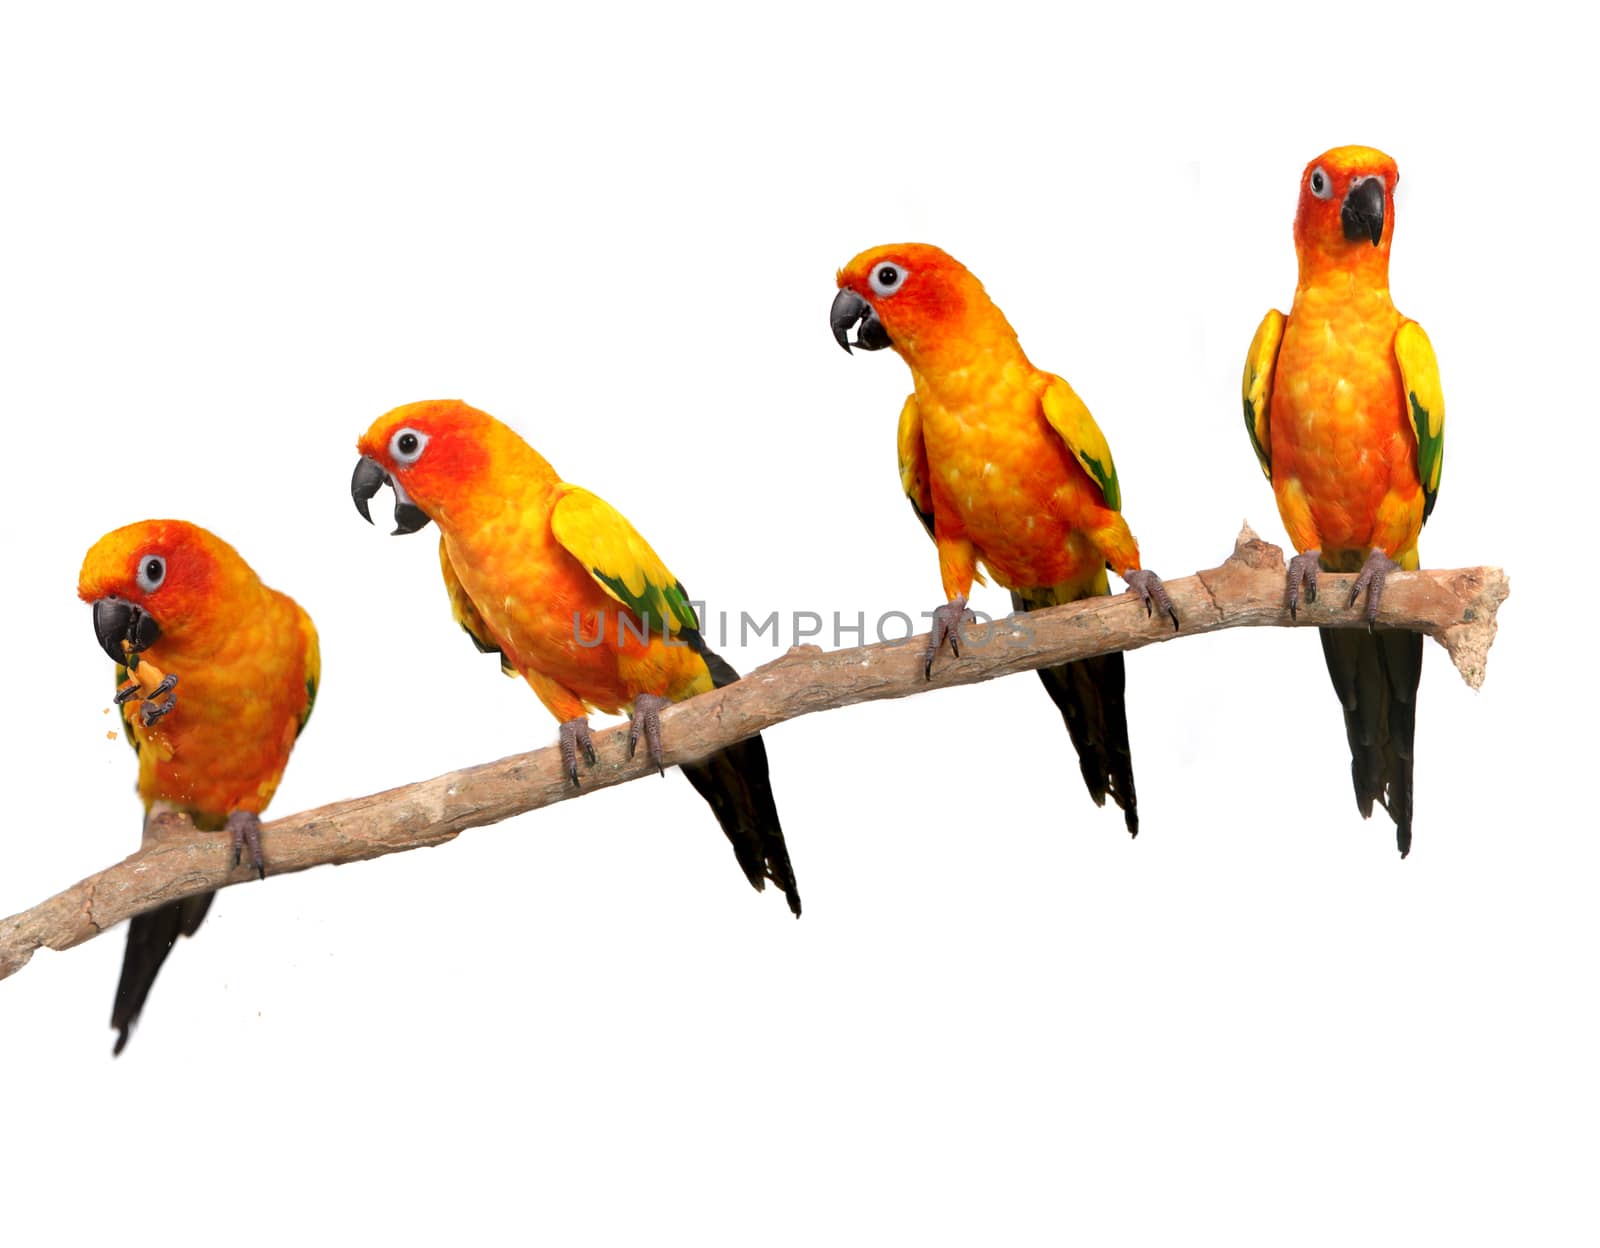 Happy Sun Conure Parrots on a Perch on White Background by tobkatrina